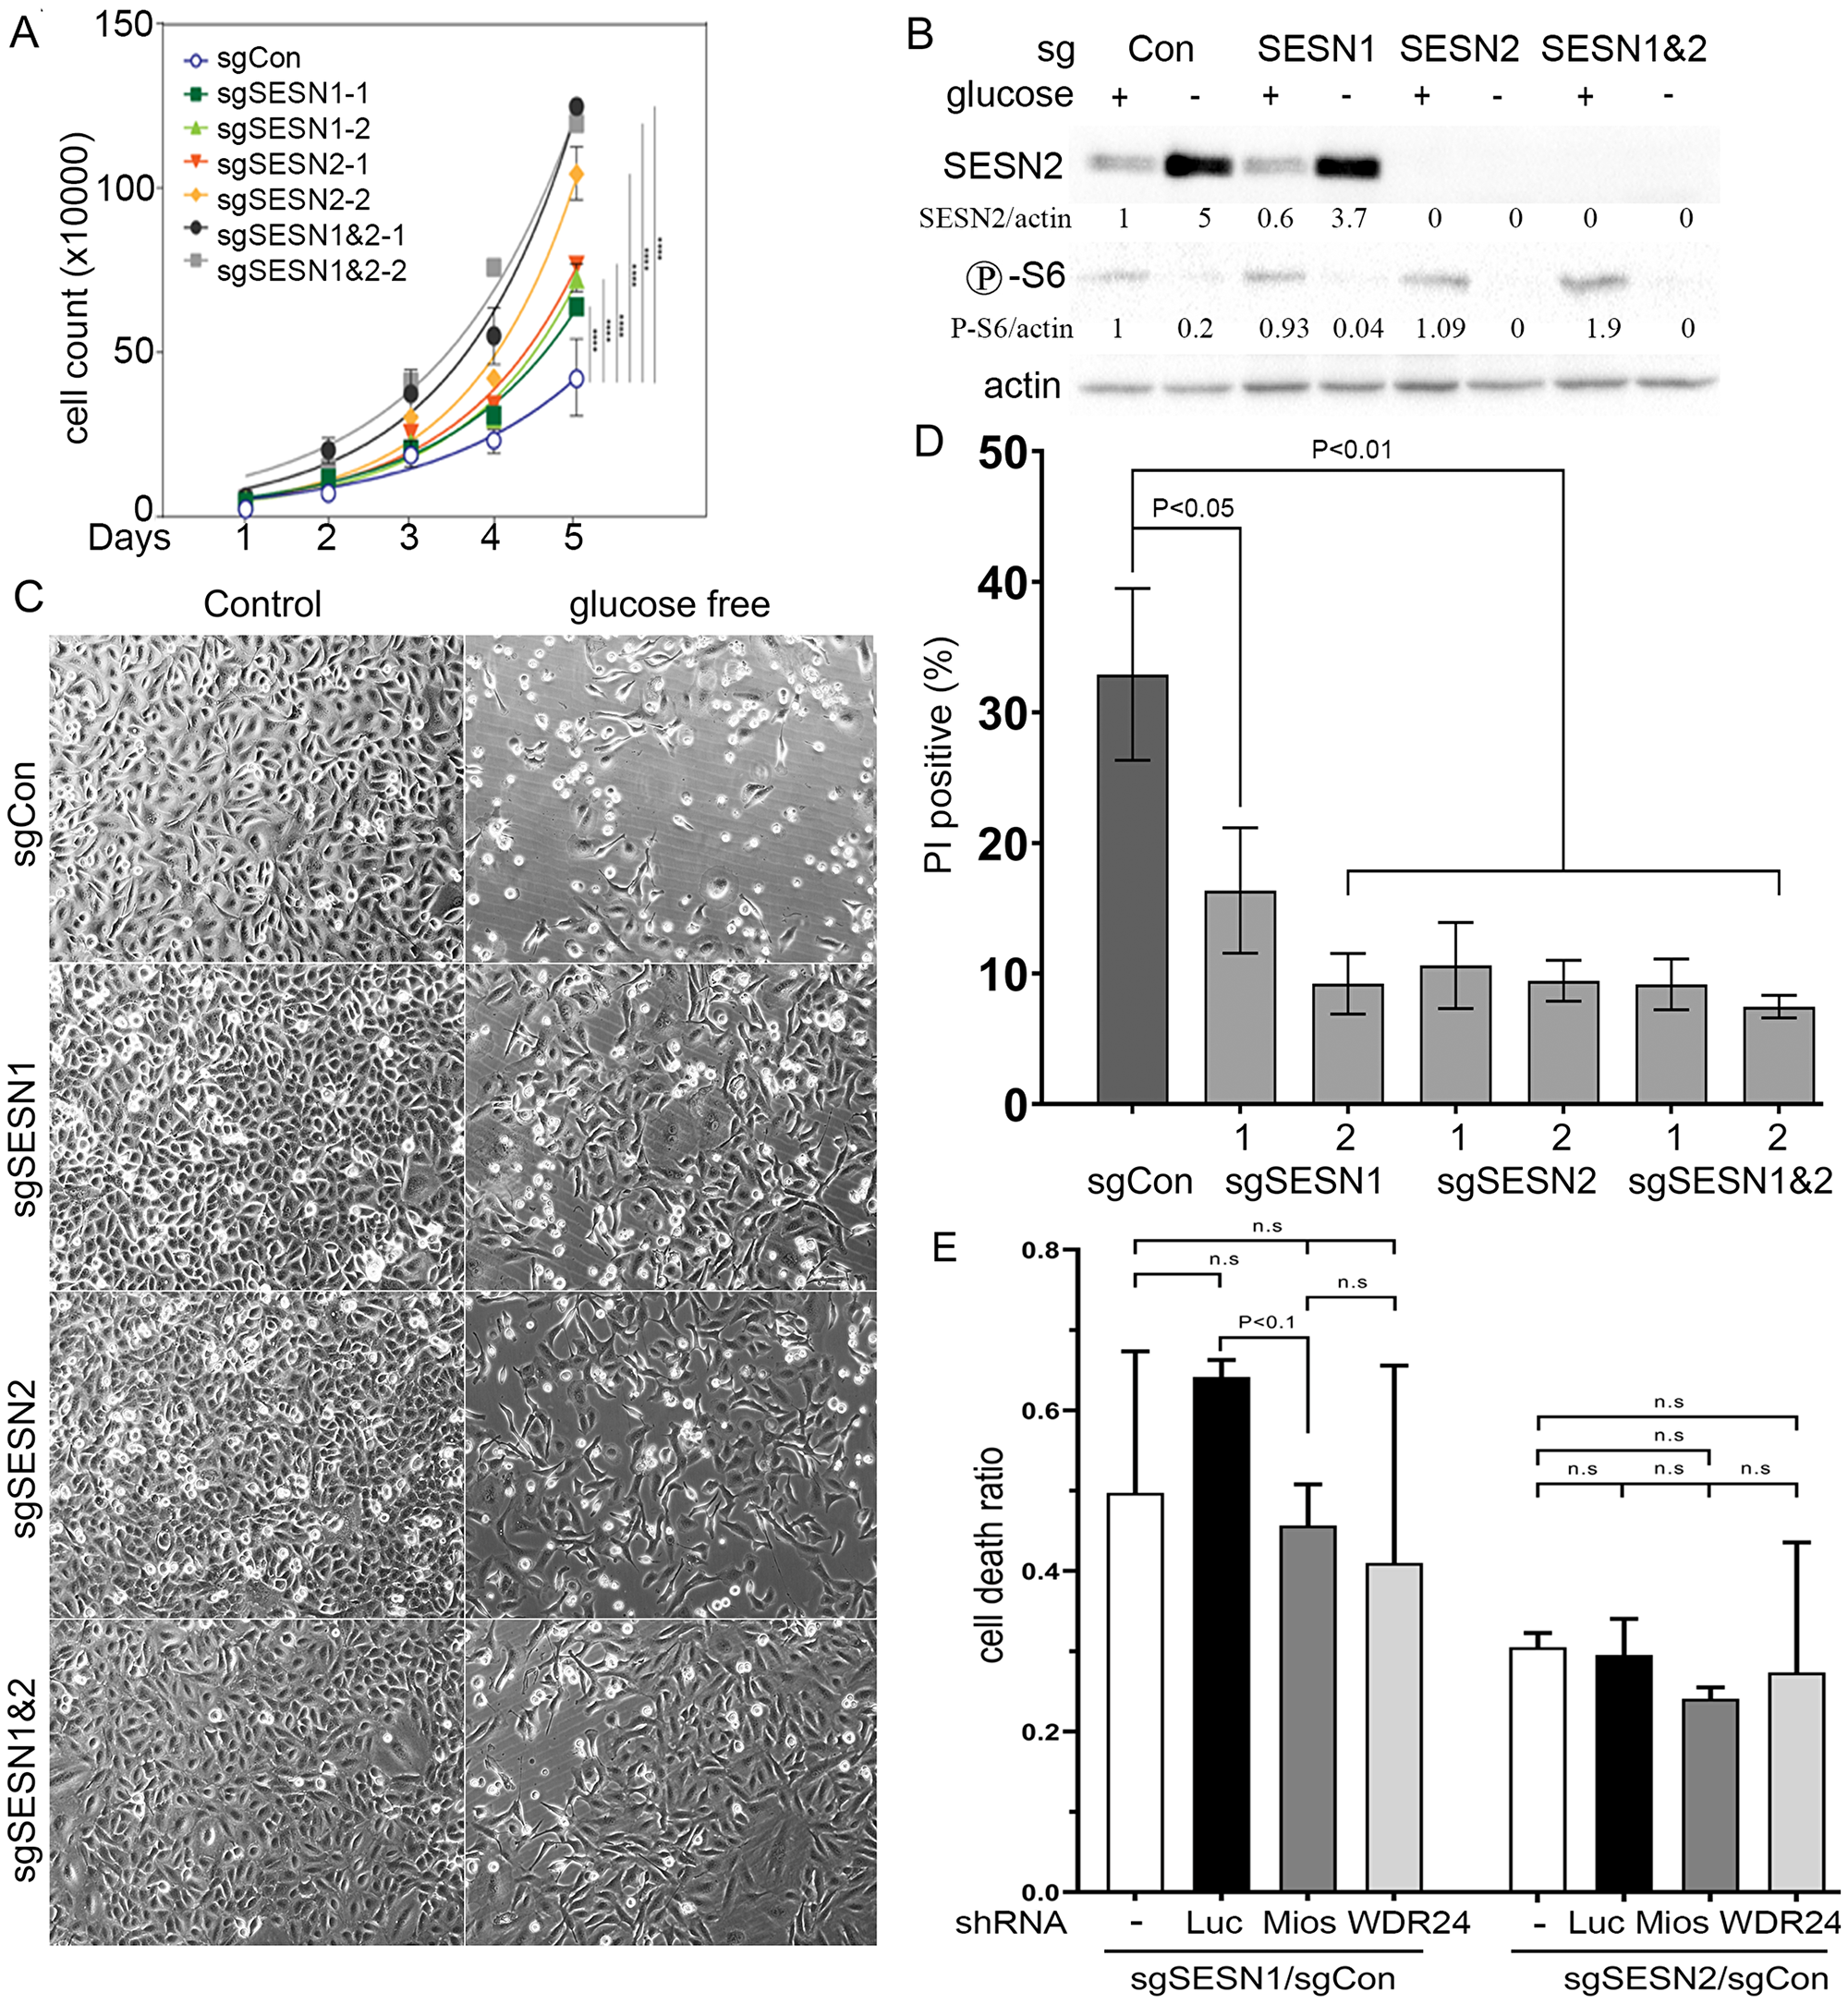 Inactivation of SESN1 and/or SESN2 in lung adenocarcinoma A549 cells stimulates cell proliferation rate and increases resistance to glucose starvation.